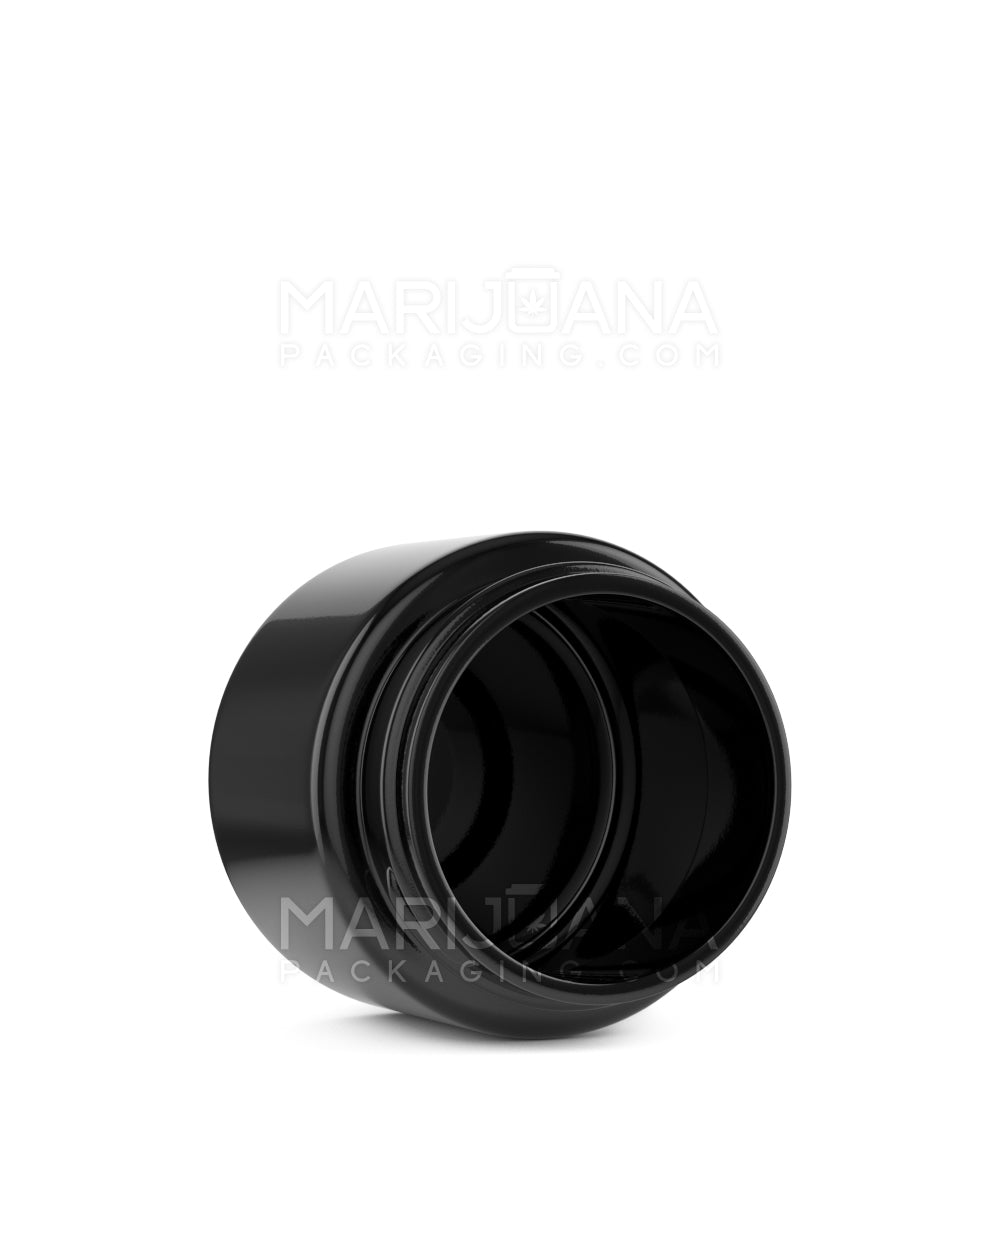 Straight Sided Glossy Black Glass Jars | 50mm - 2oz - 200 Count - 3